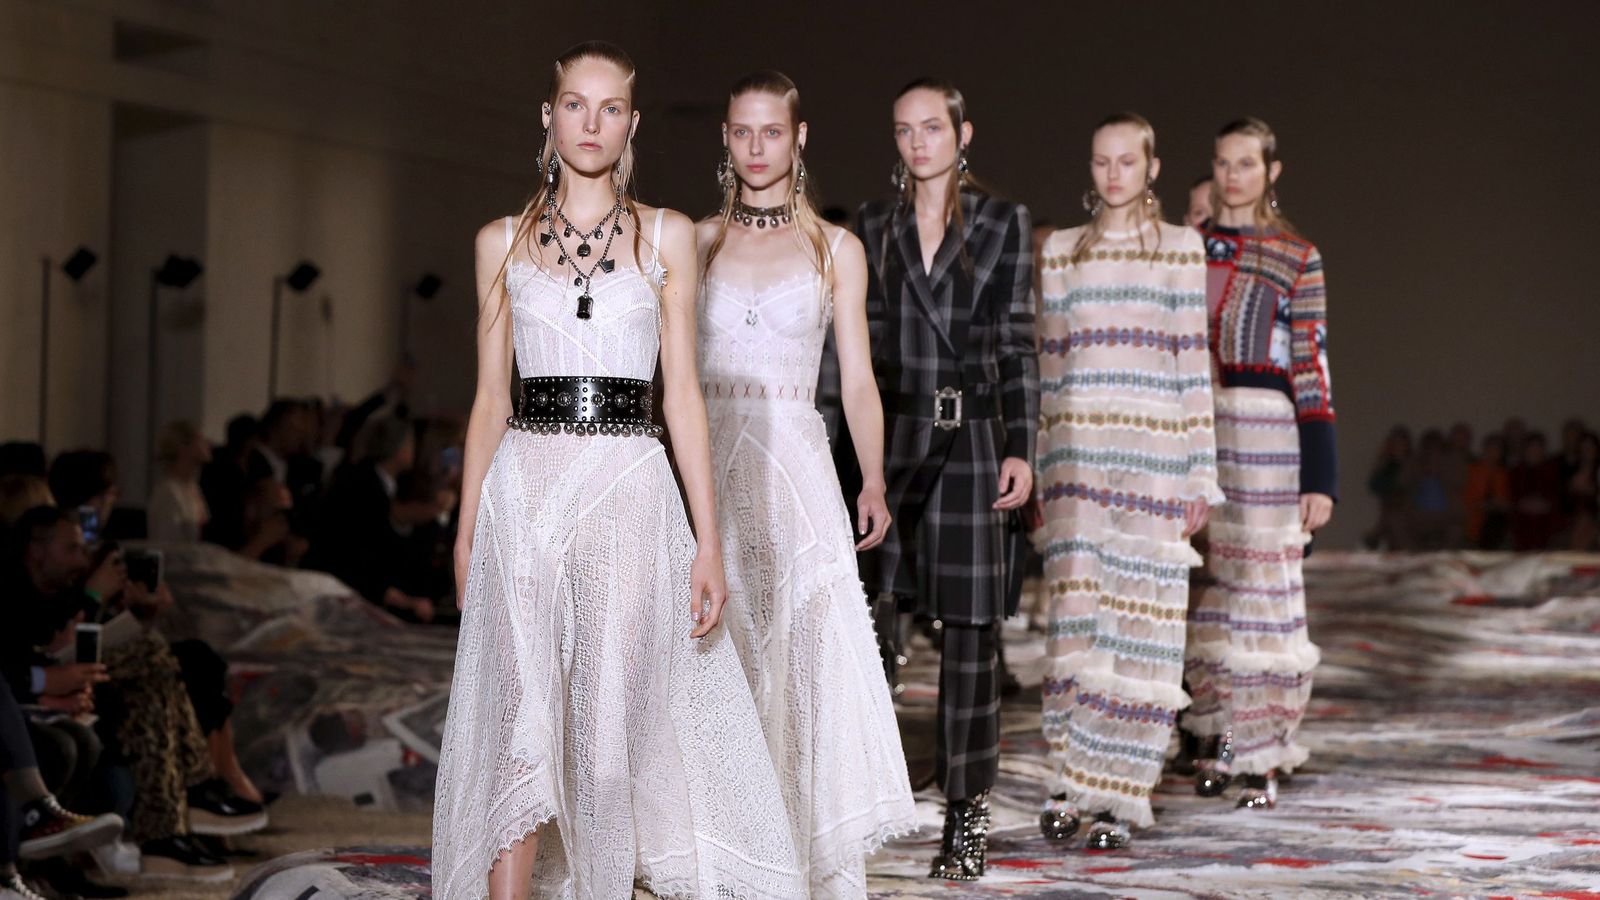 Net-a-porter rival Matchesfashion in talks about £600m sale | Business ...